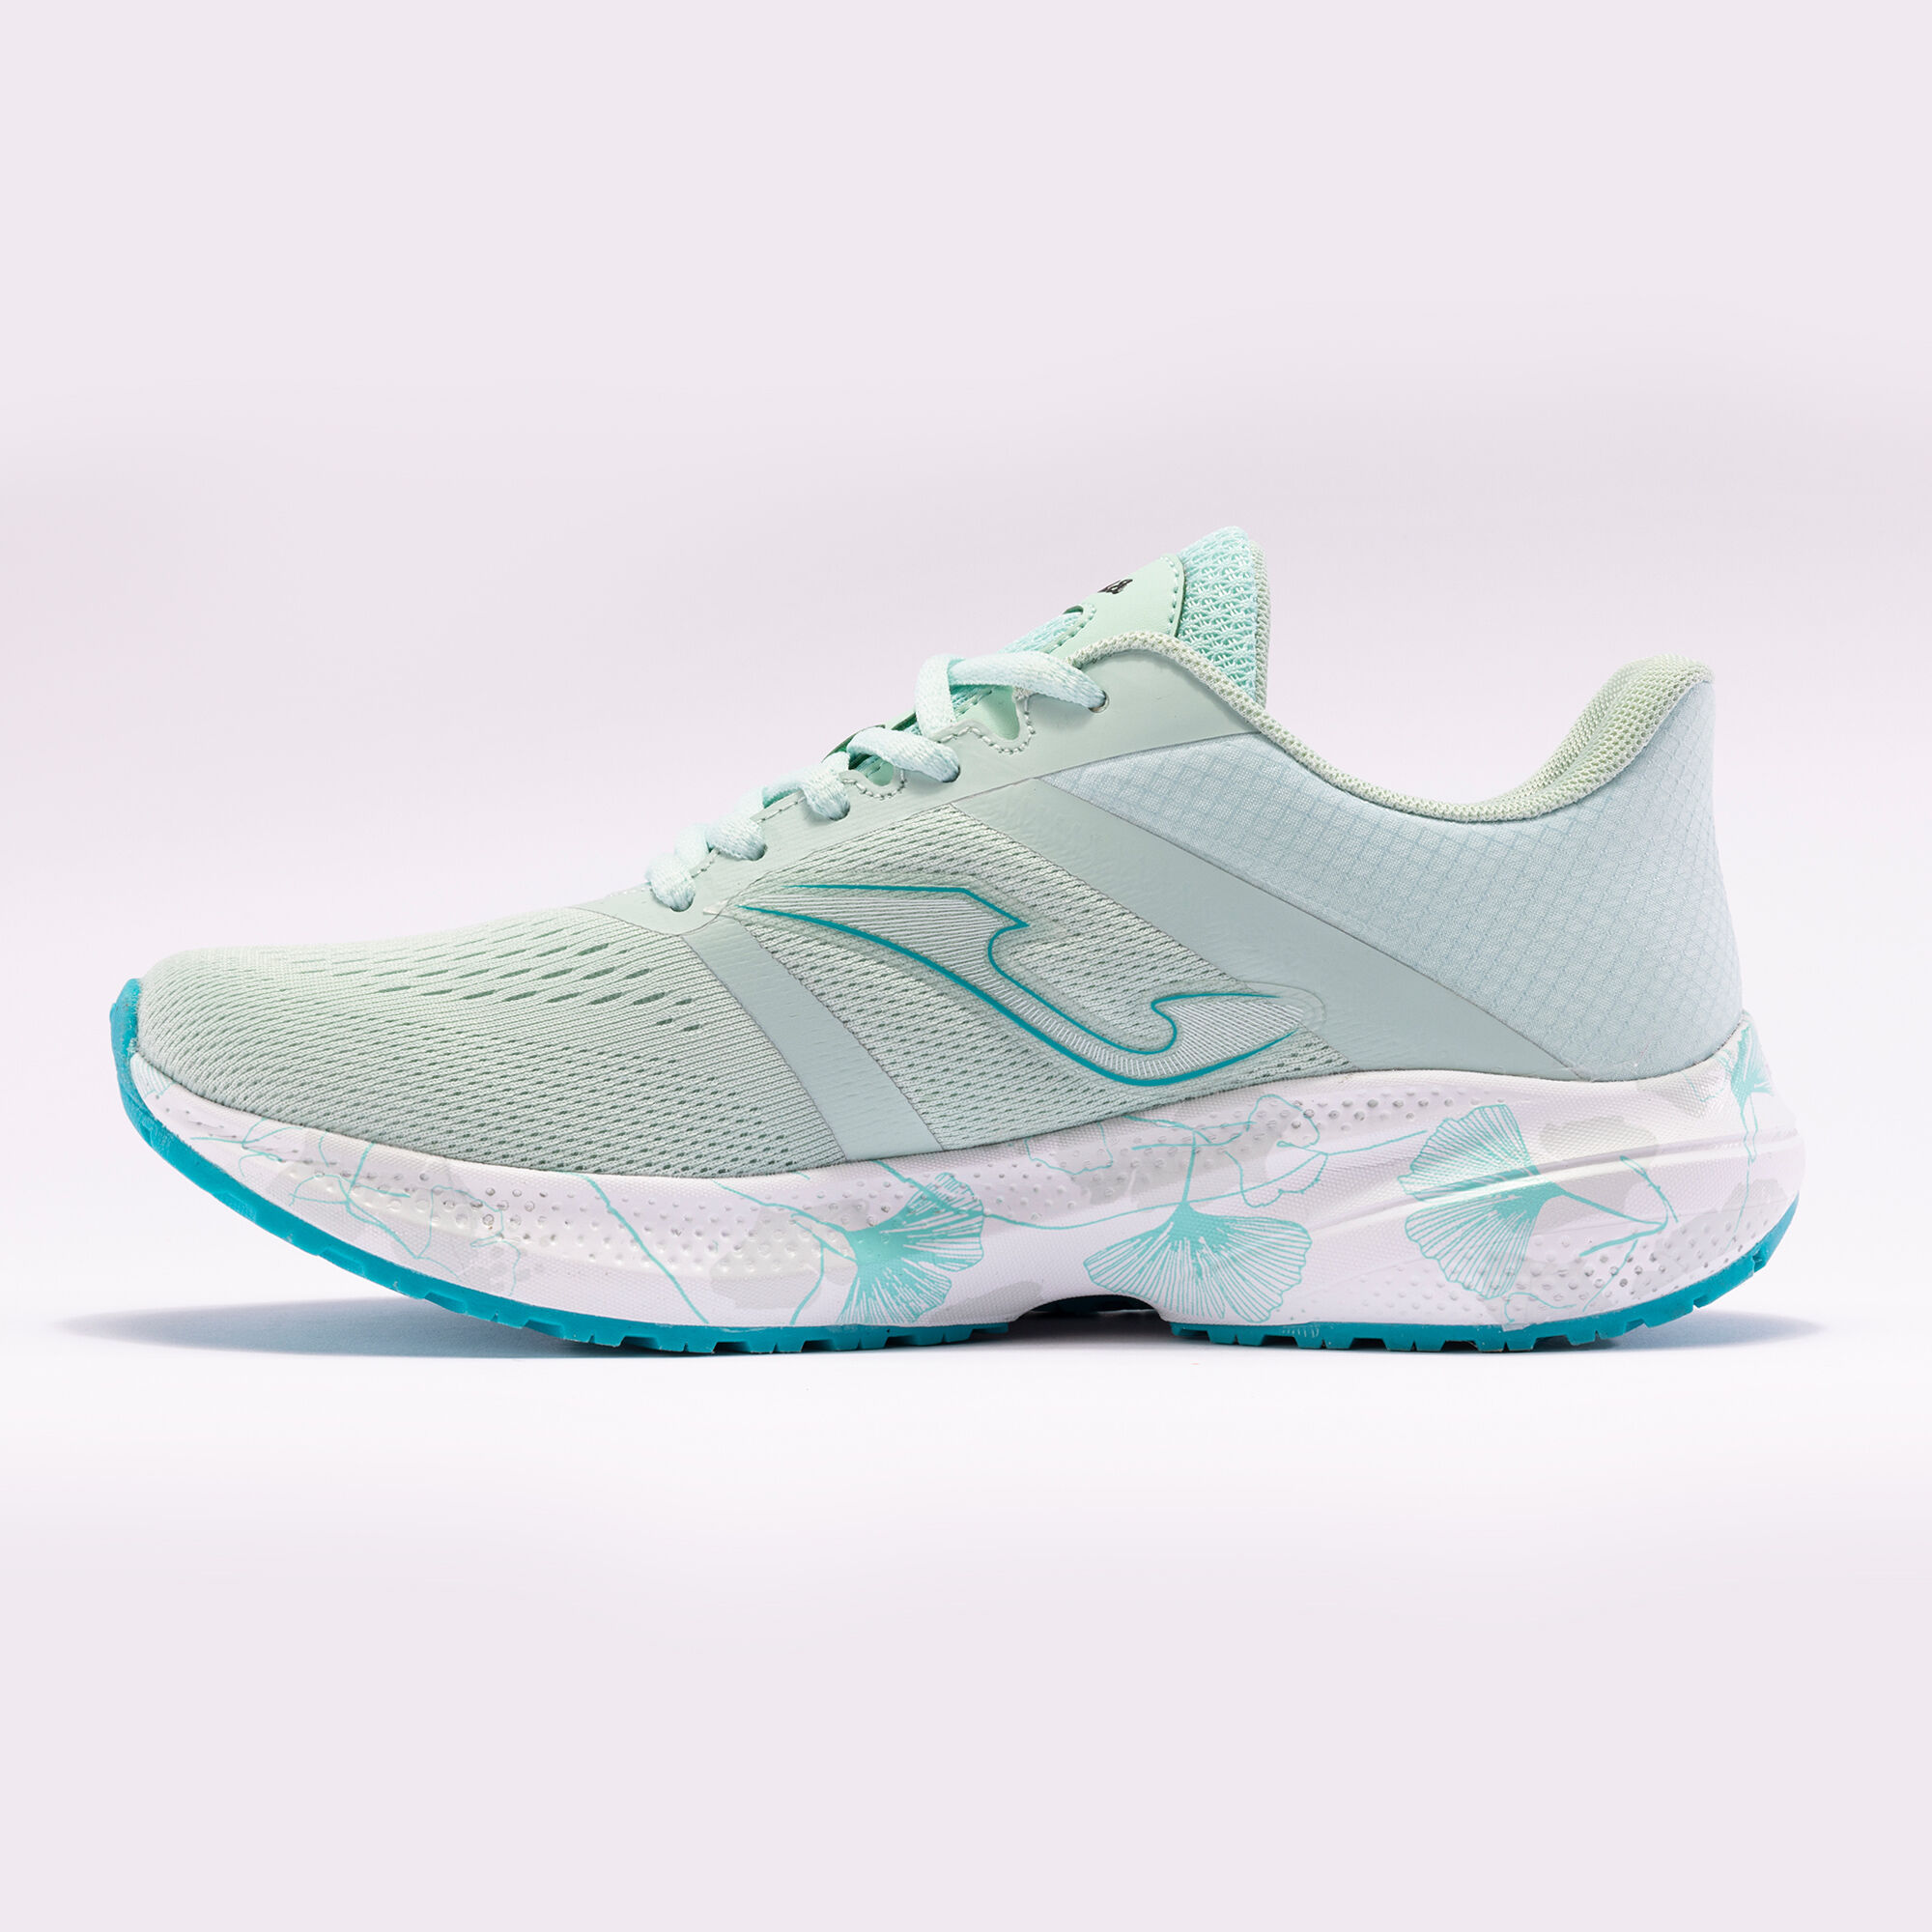 Chaussures running Elite Lady 24 femme turquoise